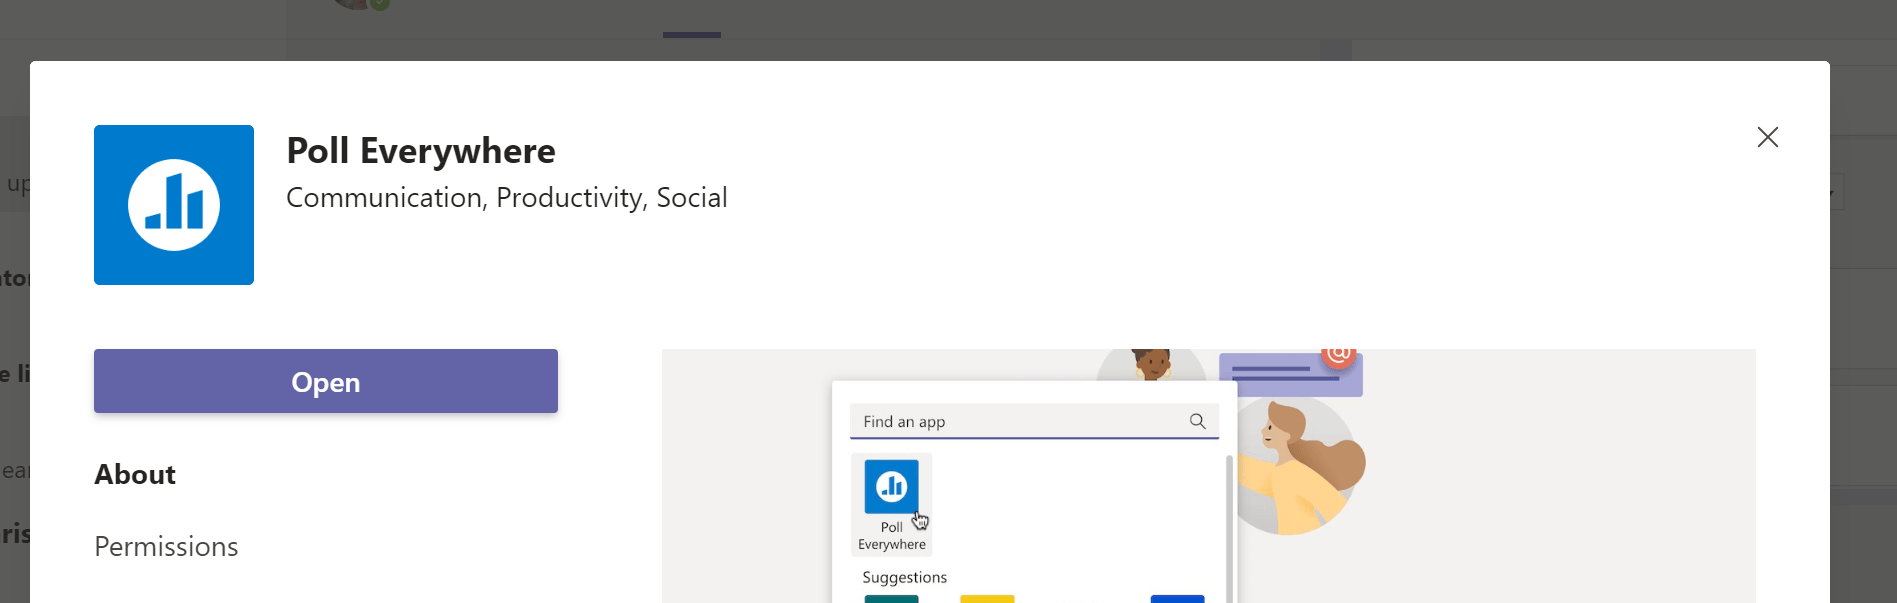 Screenshot showing the Poll Everywhere plugin being added to MS Teams.